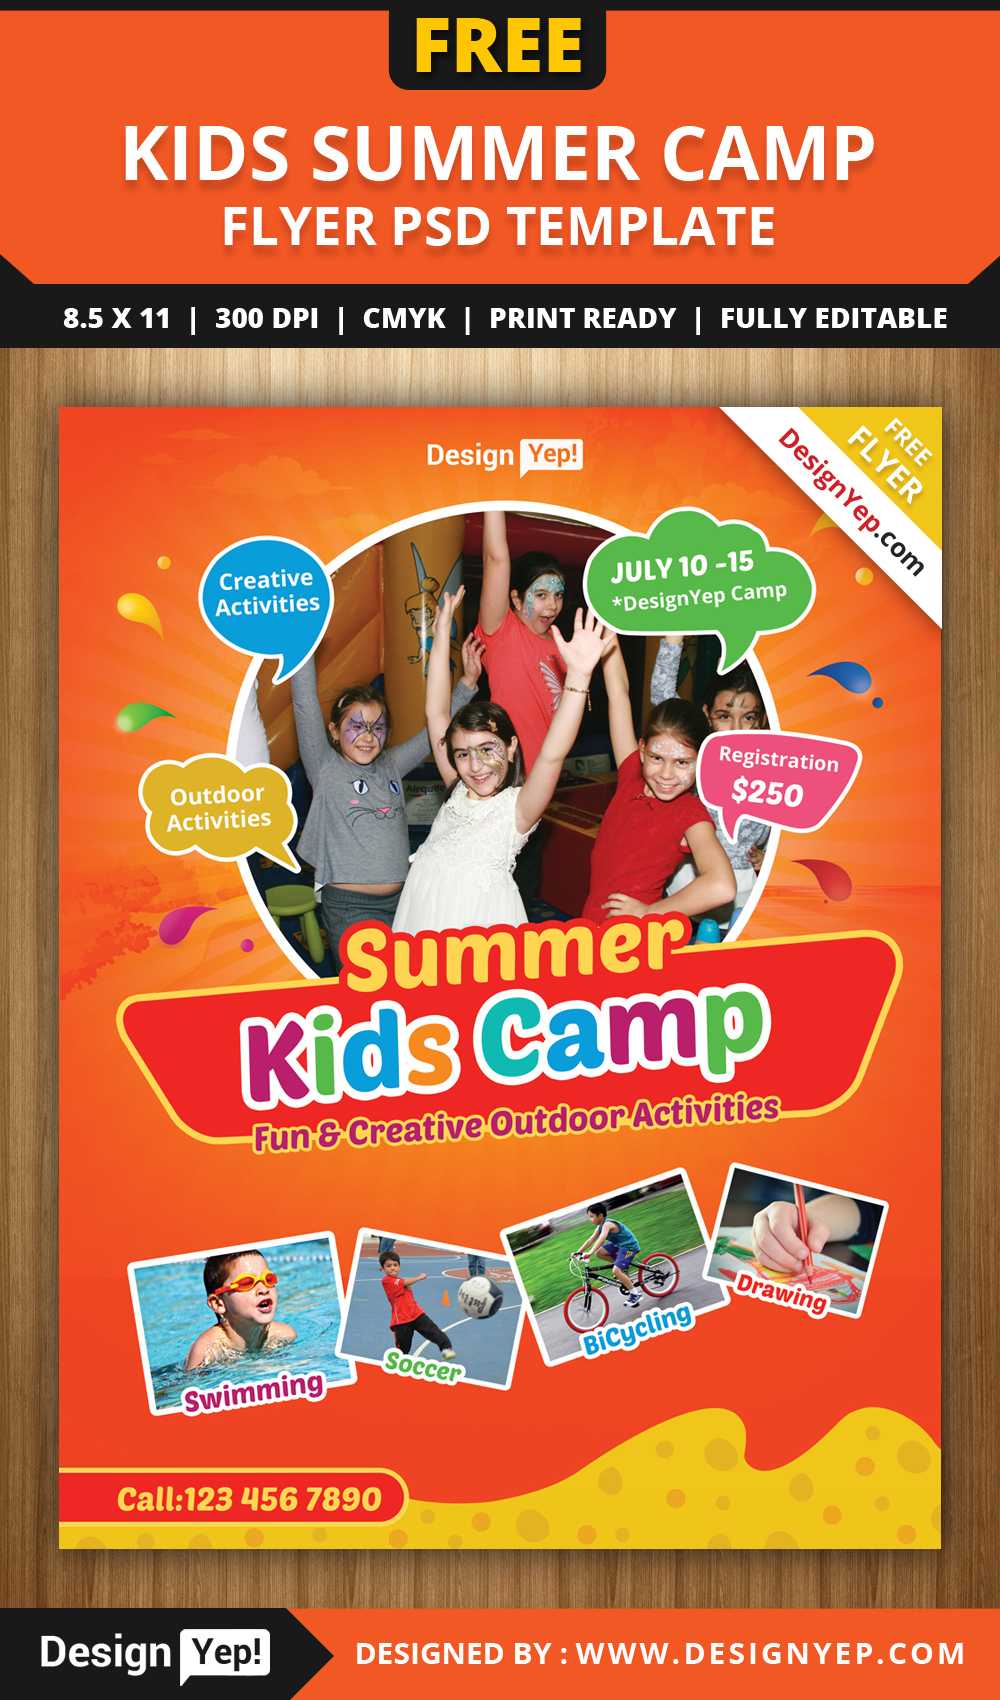 Free Kids Summer Camp Flyer Psd Template On Behance With Regard To Summer Camp Brochure Template Free Download